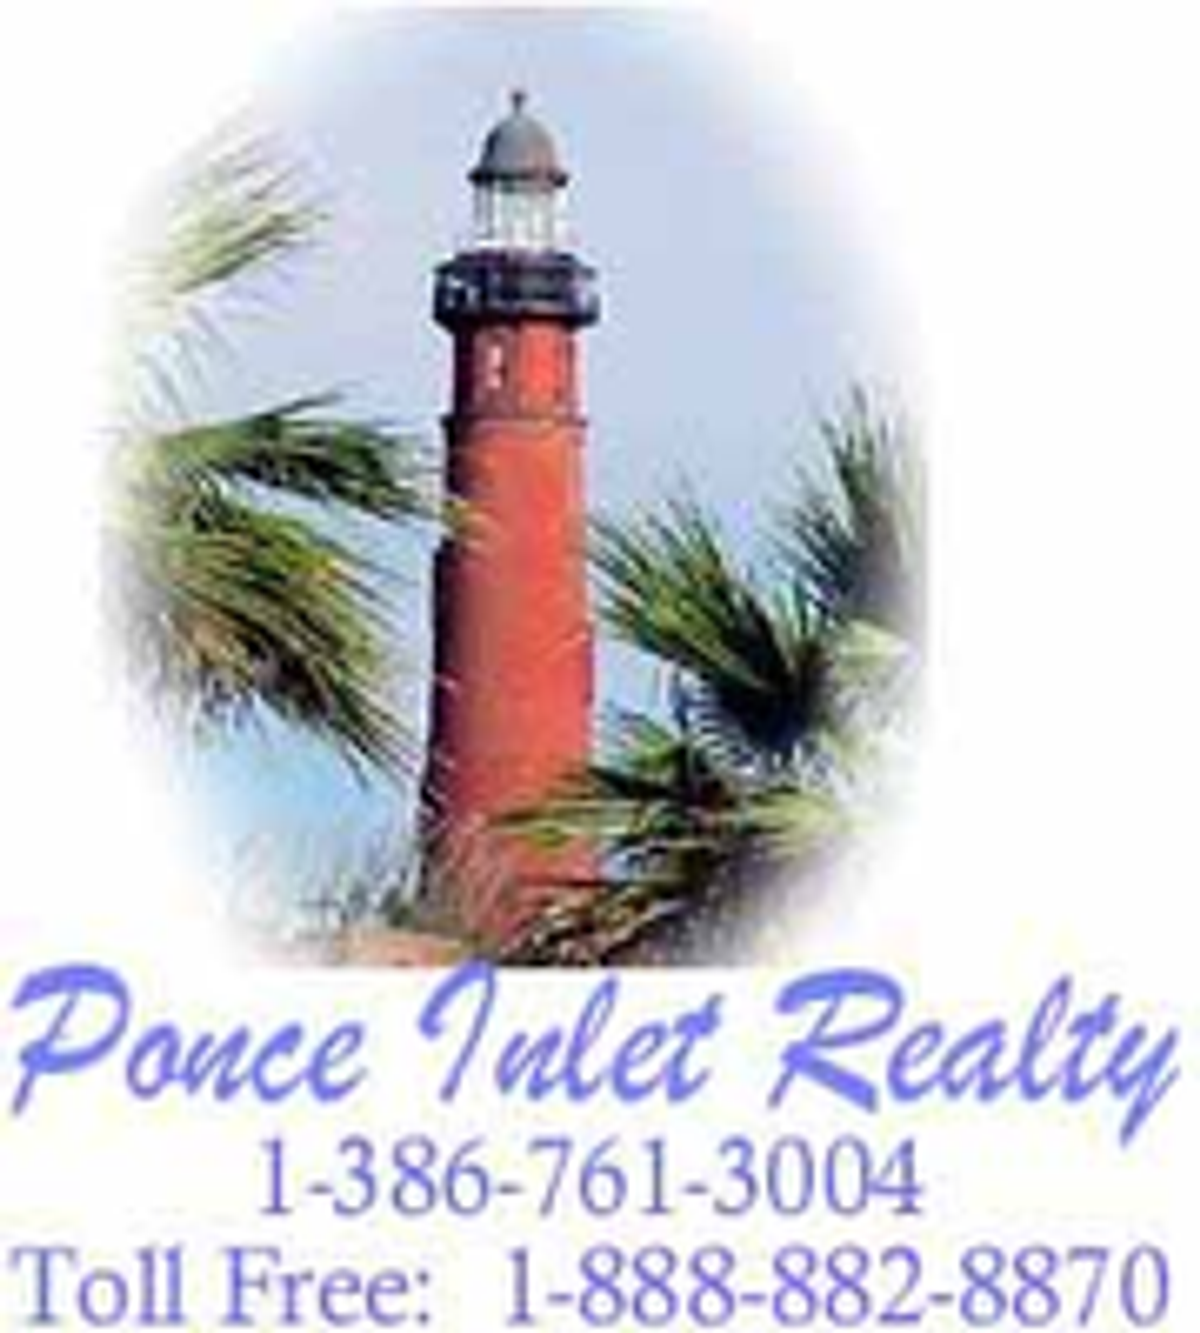 Photo for Penny Norfolk, Listing Agent at Ponce Inlet Realty, Inc